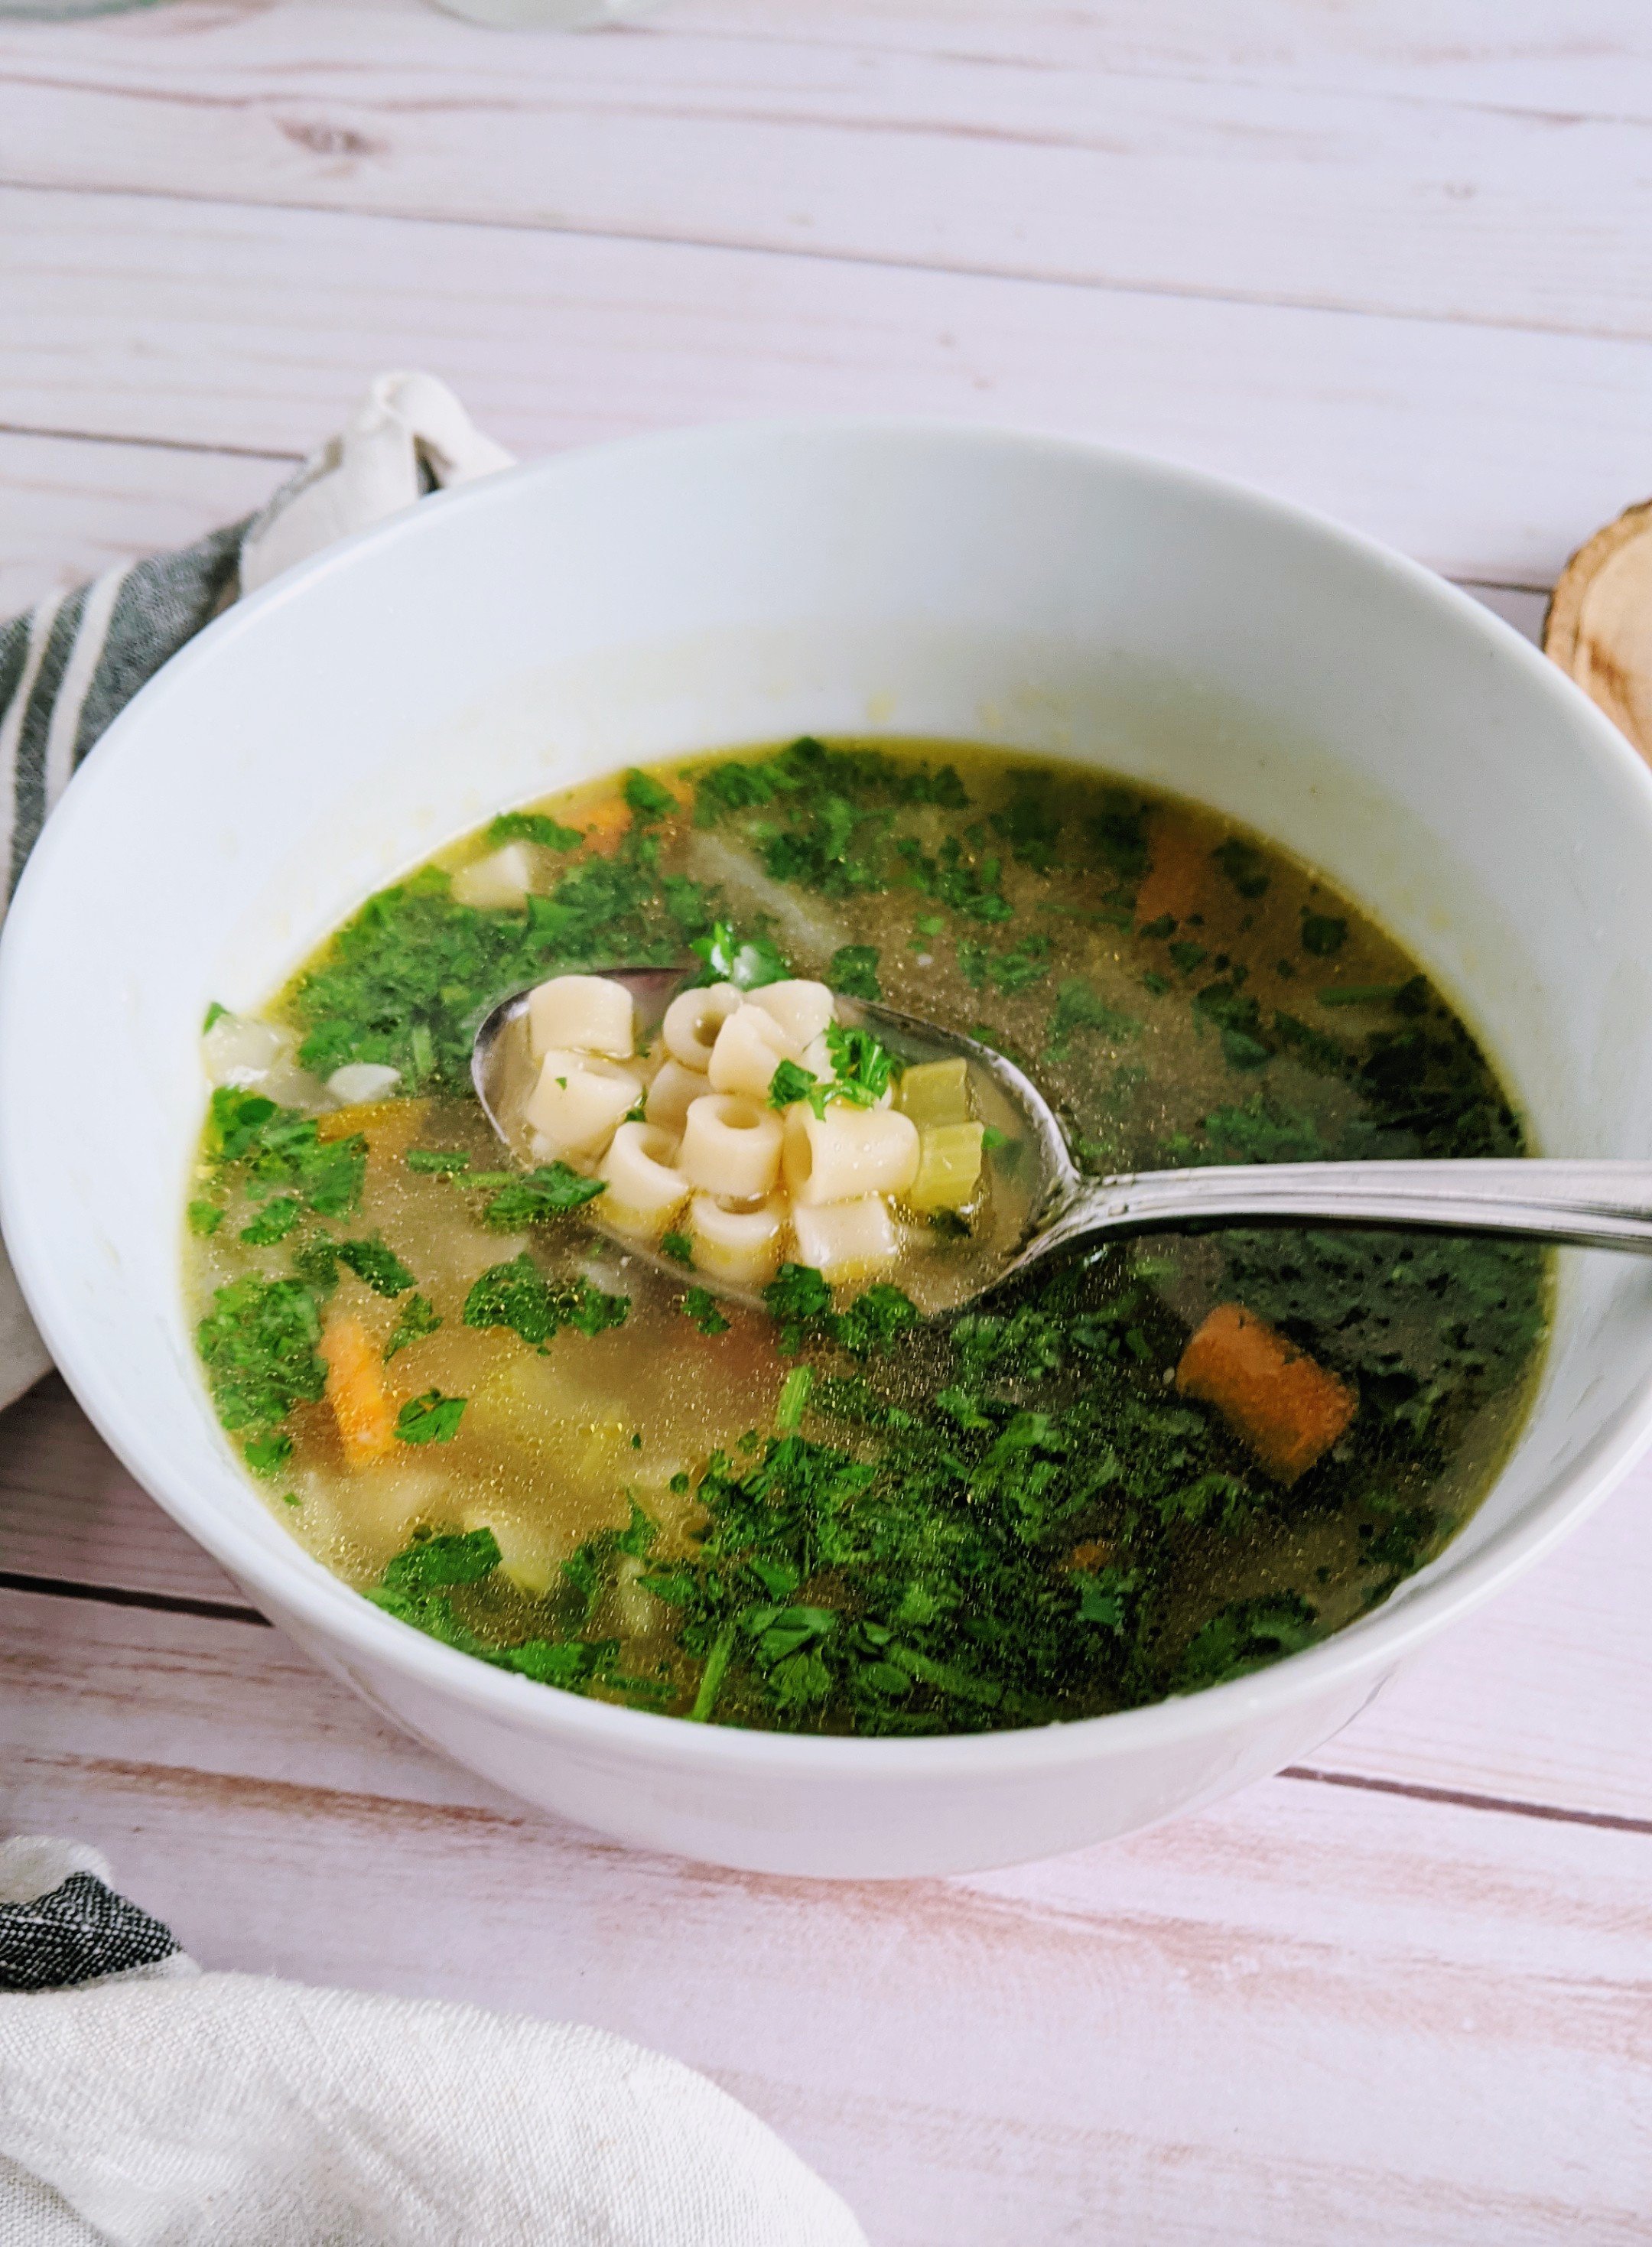 parsley soup recipe healthy recipes with parsley parsley stem soup stock vegetable stock parsley soup with noodles carrots onion celery and ditalini pasta soup